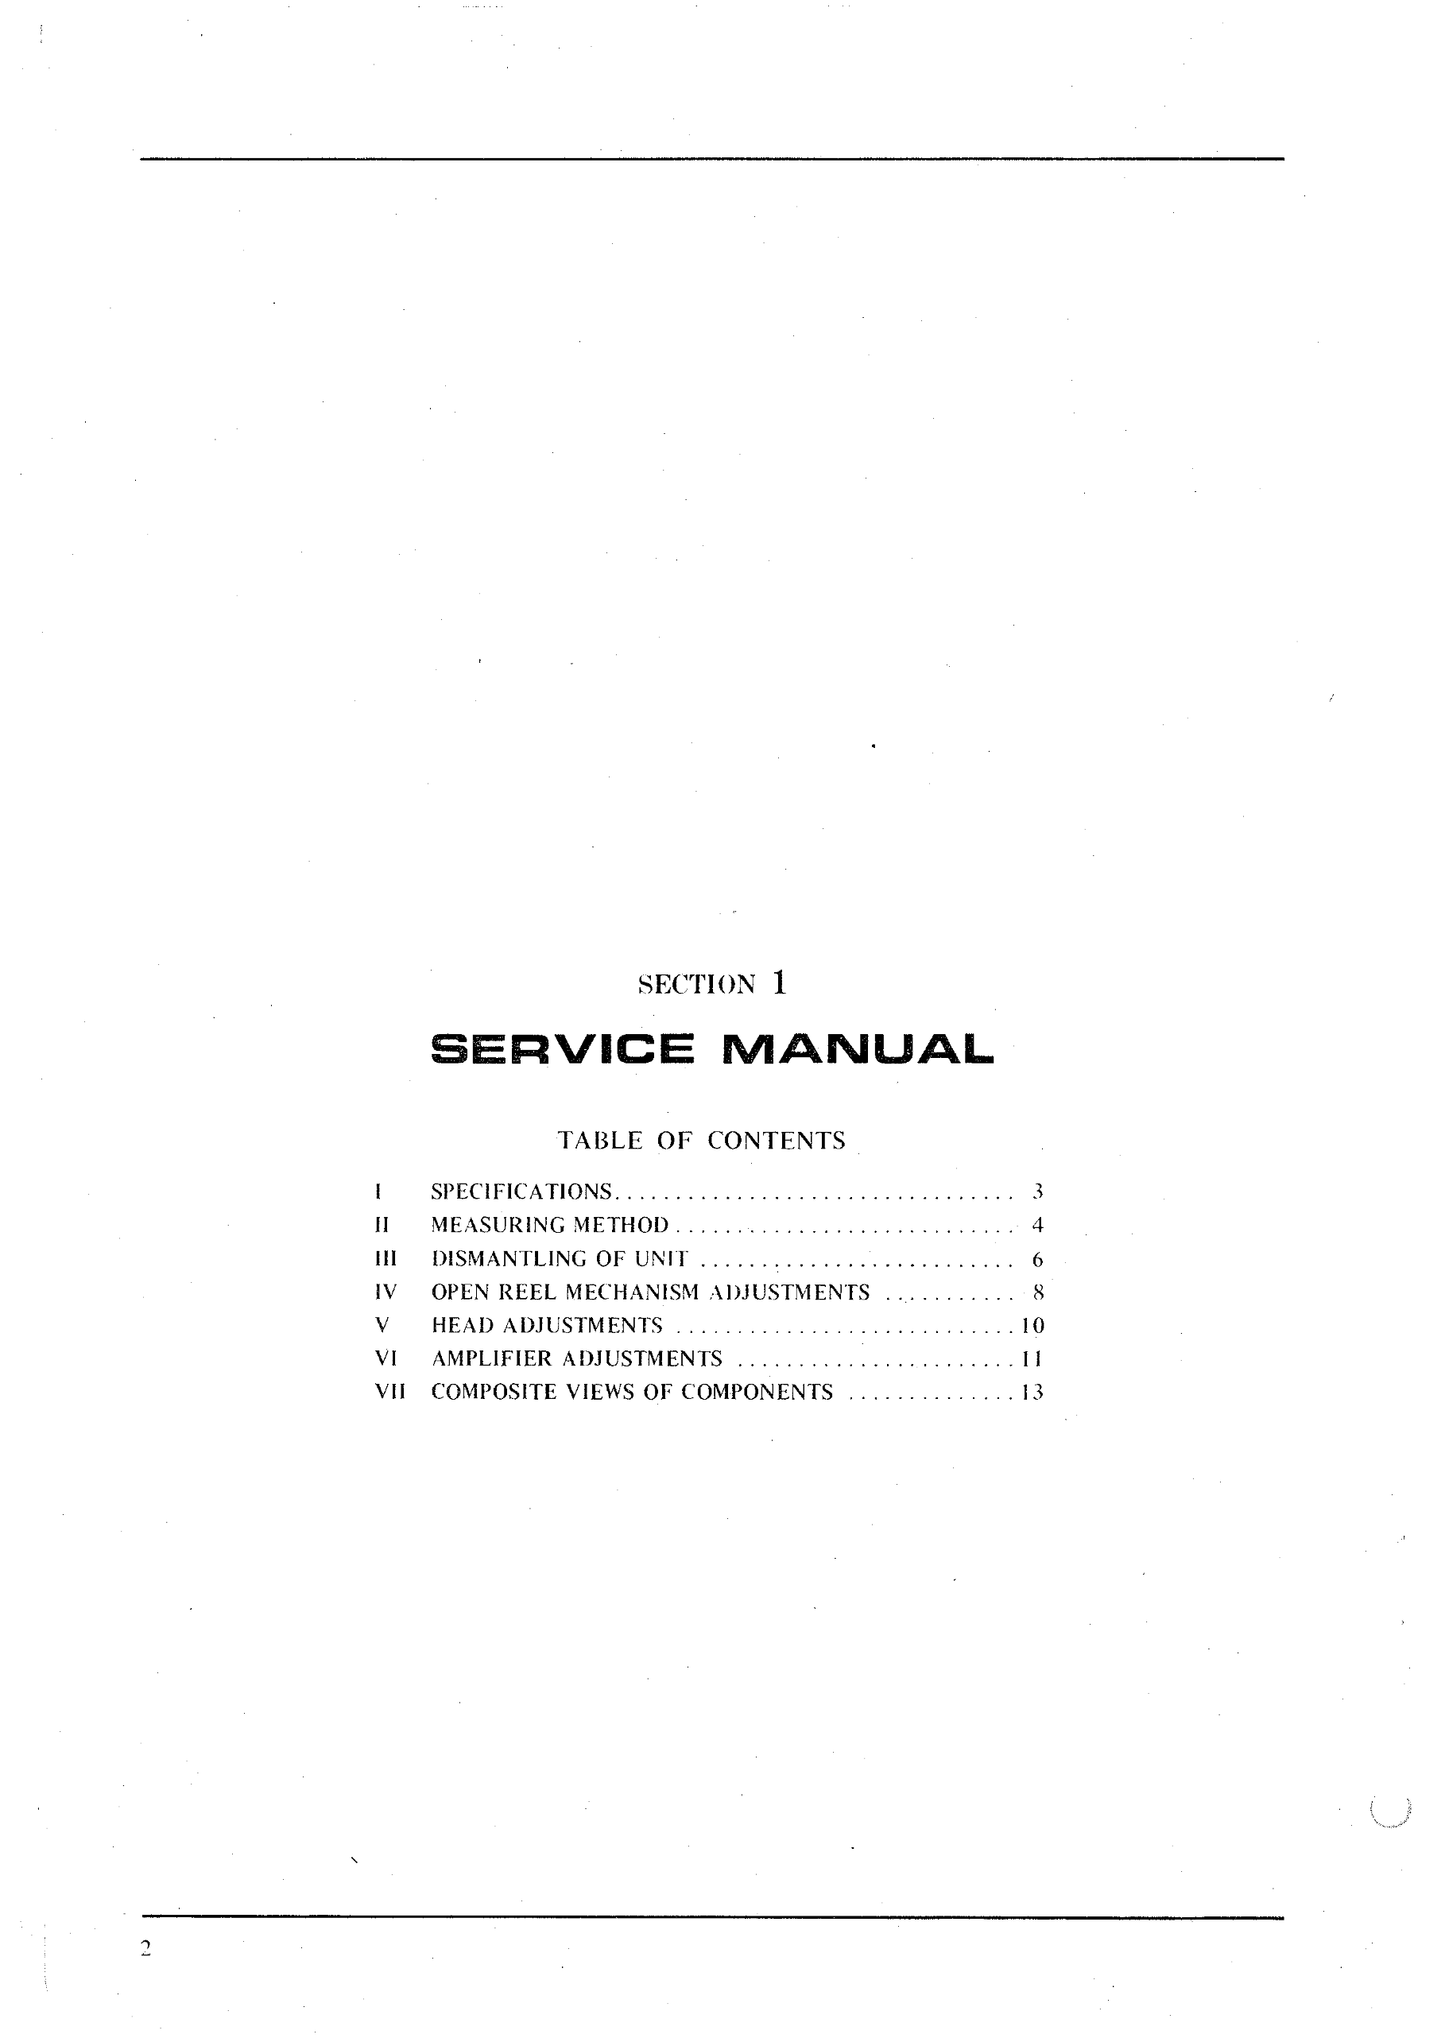 Akai Model 1731D, 1731L & 1731W Reel to Reel Tape Deck Service Manual (Pages: 47)